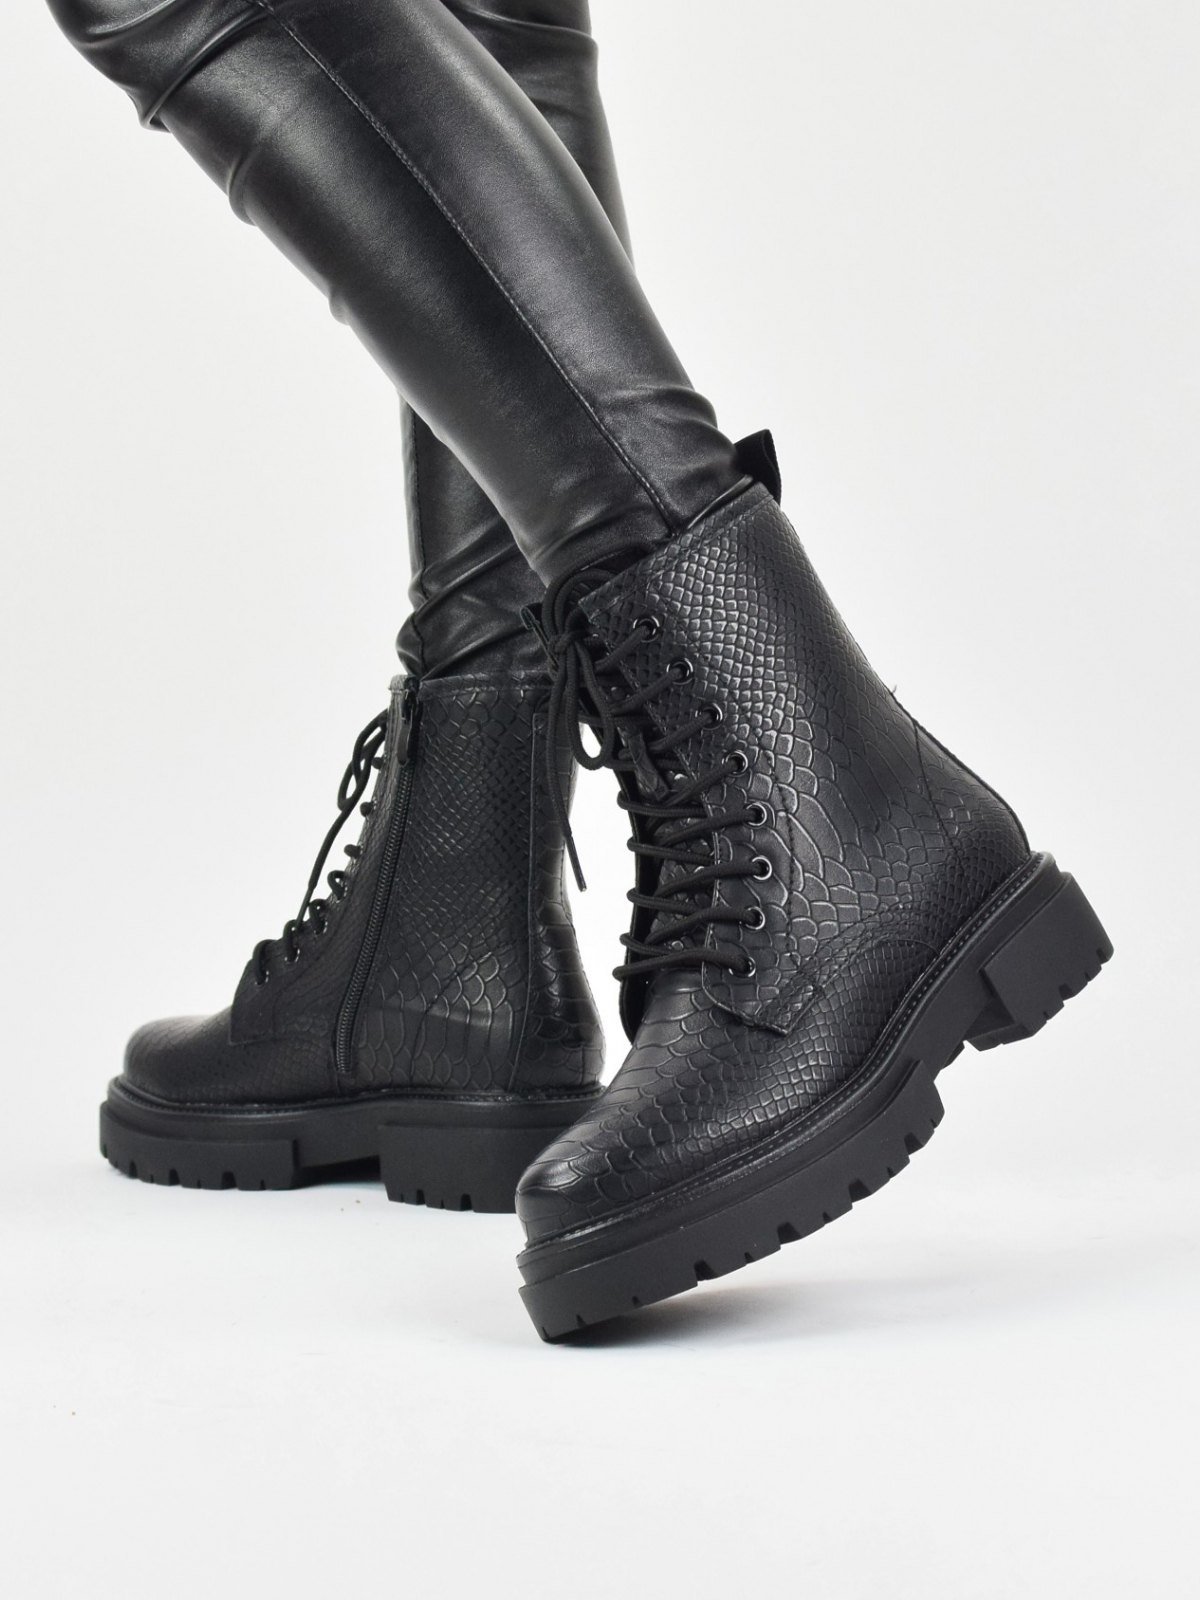 Snake style lace up ankle boots with side zip in black